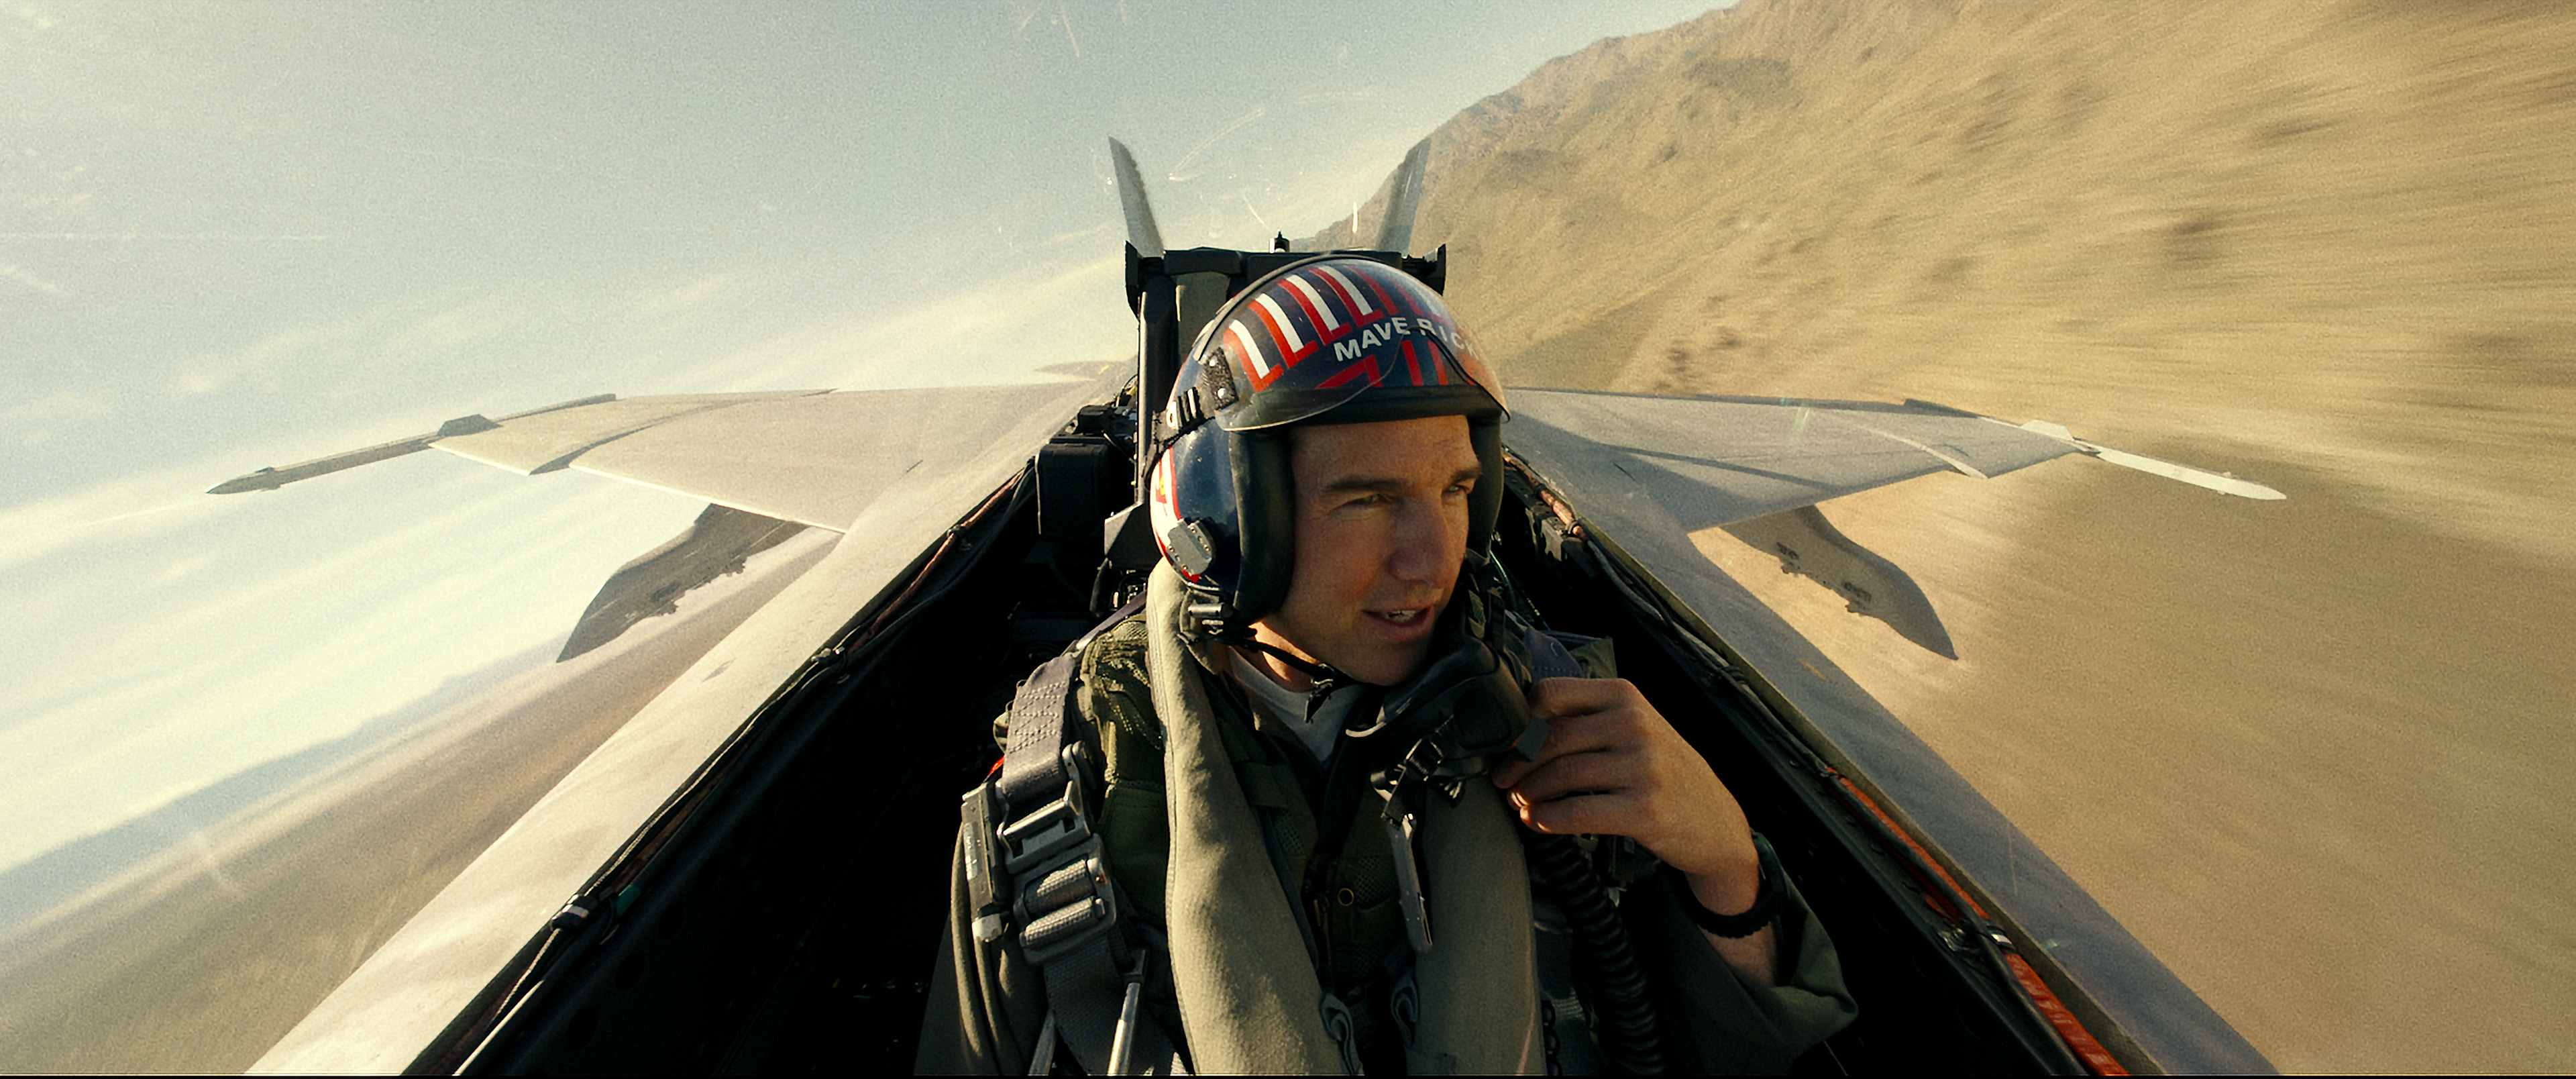 Top Gun' 36 years later: seven questions I had rewatching the 1986 film